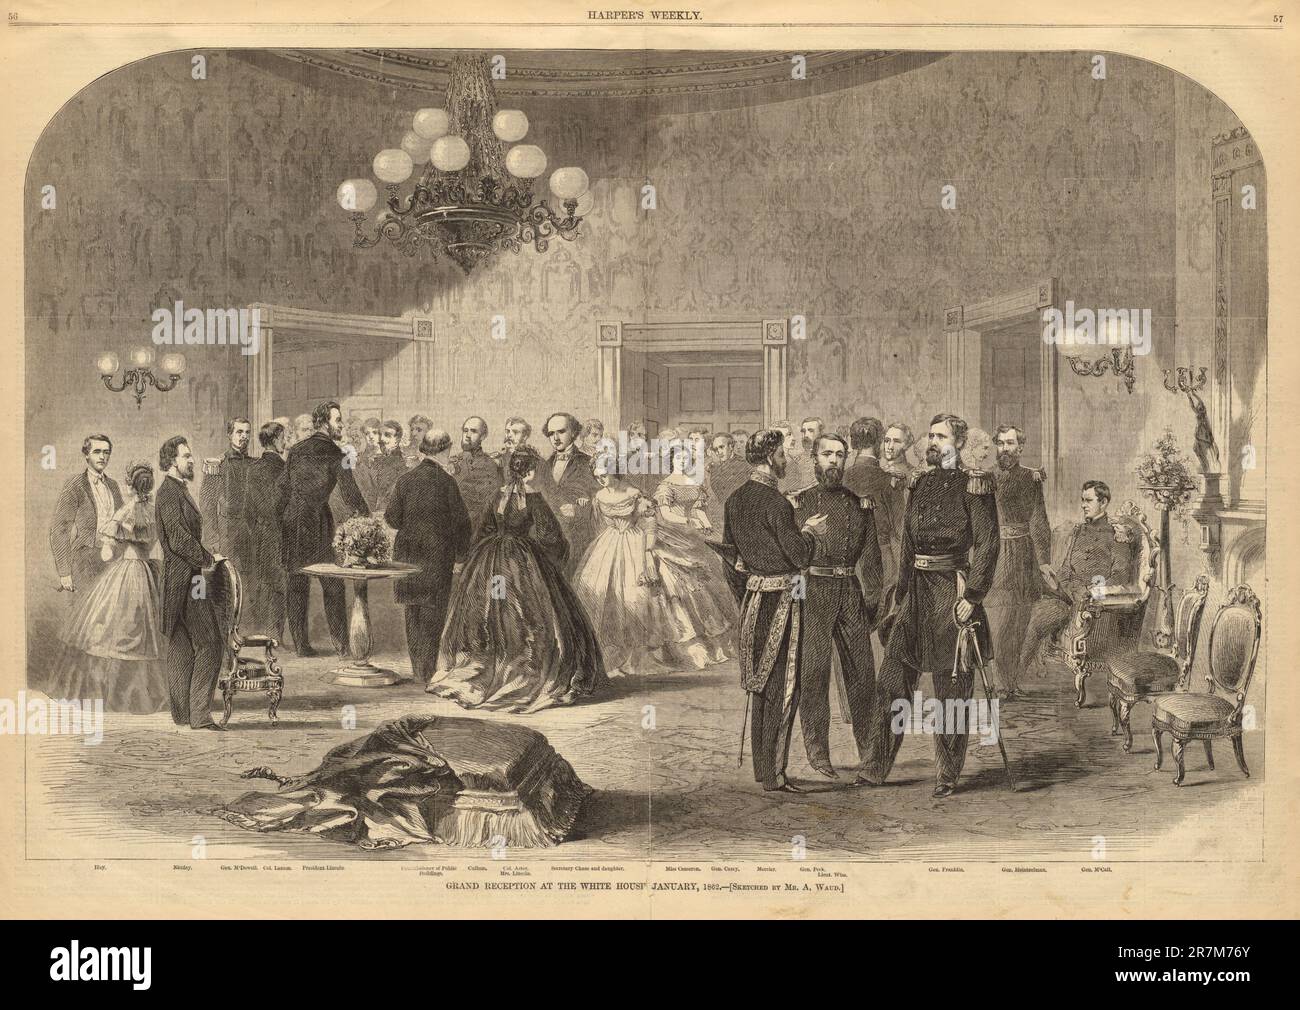 Grand Reception at the White House, January, 1862 1862 Stock Photo